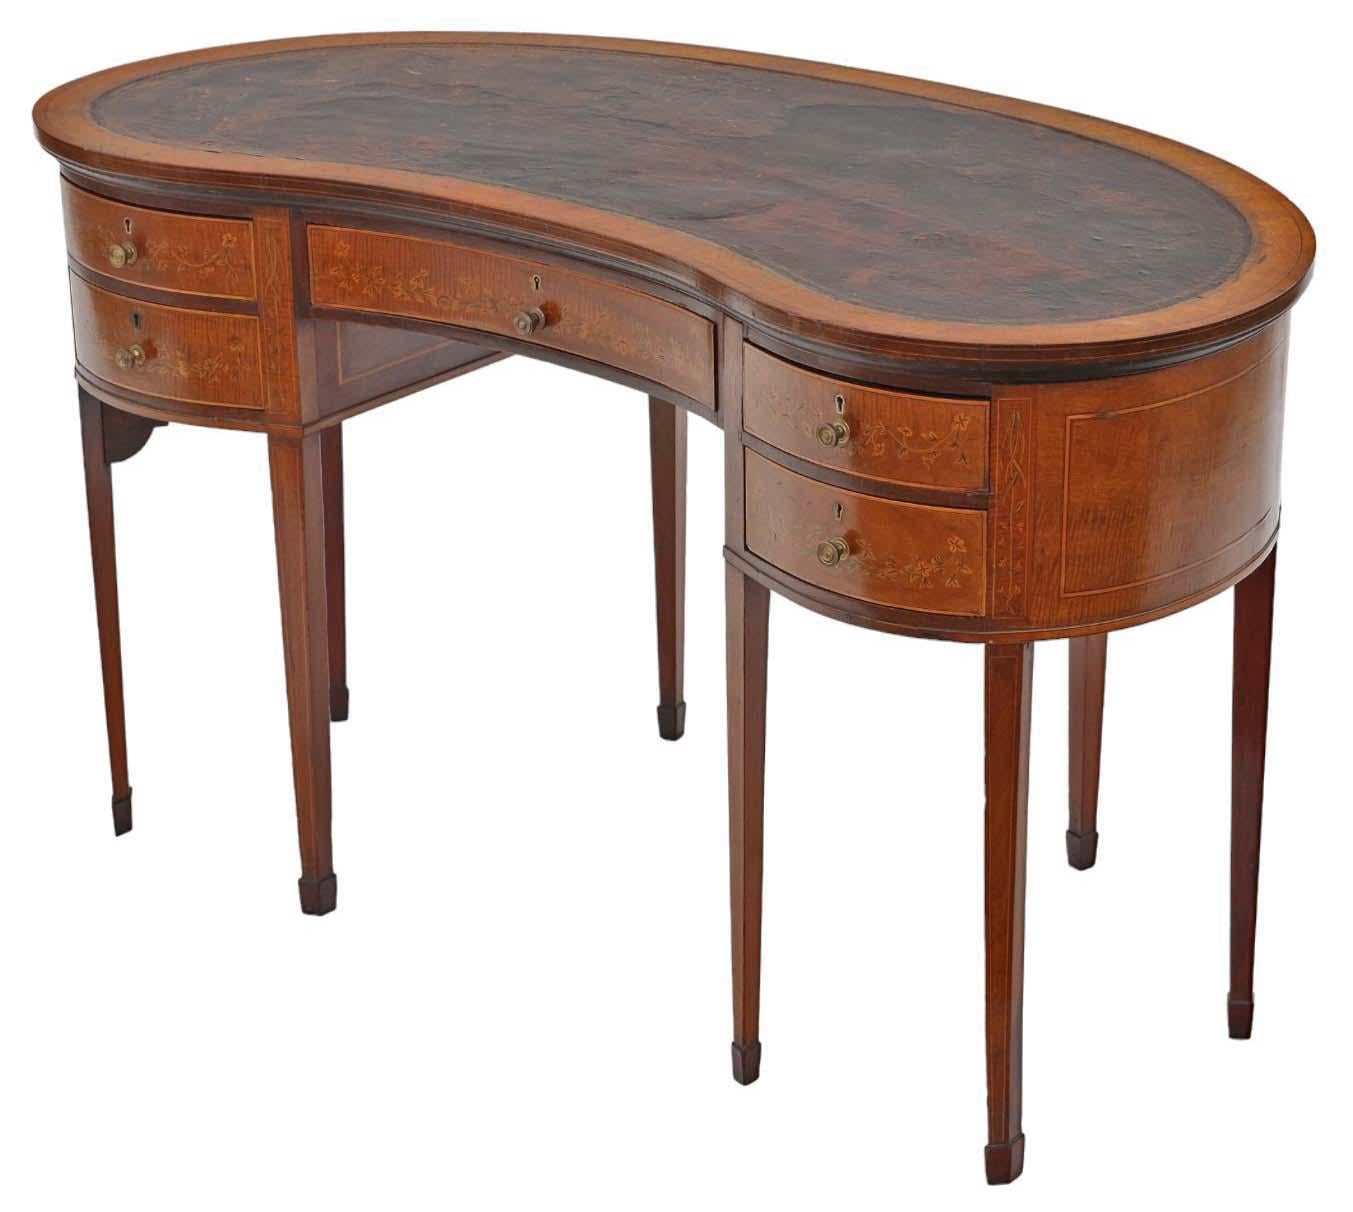 Antique, high-quality large circa 1900 inlaid mahogany kidney-shaped JAS Shoolbred twin pedestal desk, suitable for use as a dressing or writing table. It boasts a delightful age, color, and patina.

This piece is solidly constructed, with no loose